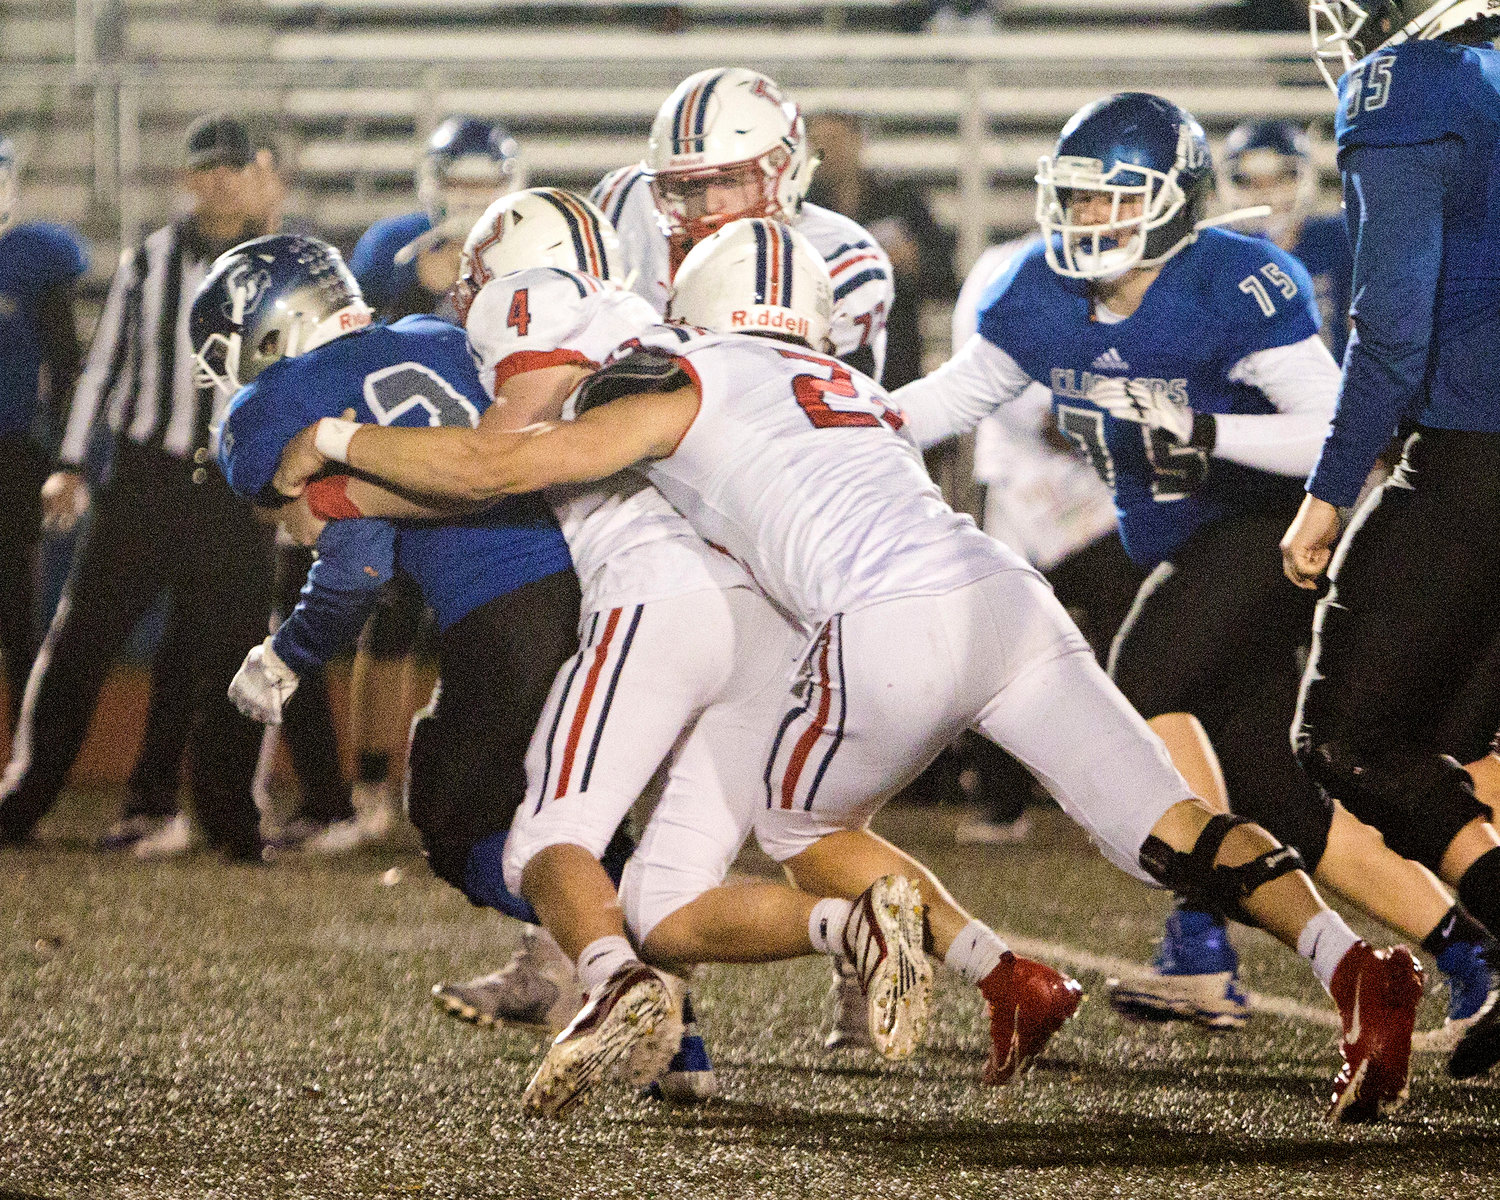 Luke Brennan (middle) and Thomas McGraw tackle a Cumberland opponent.